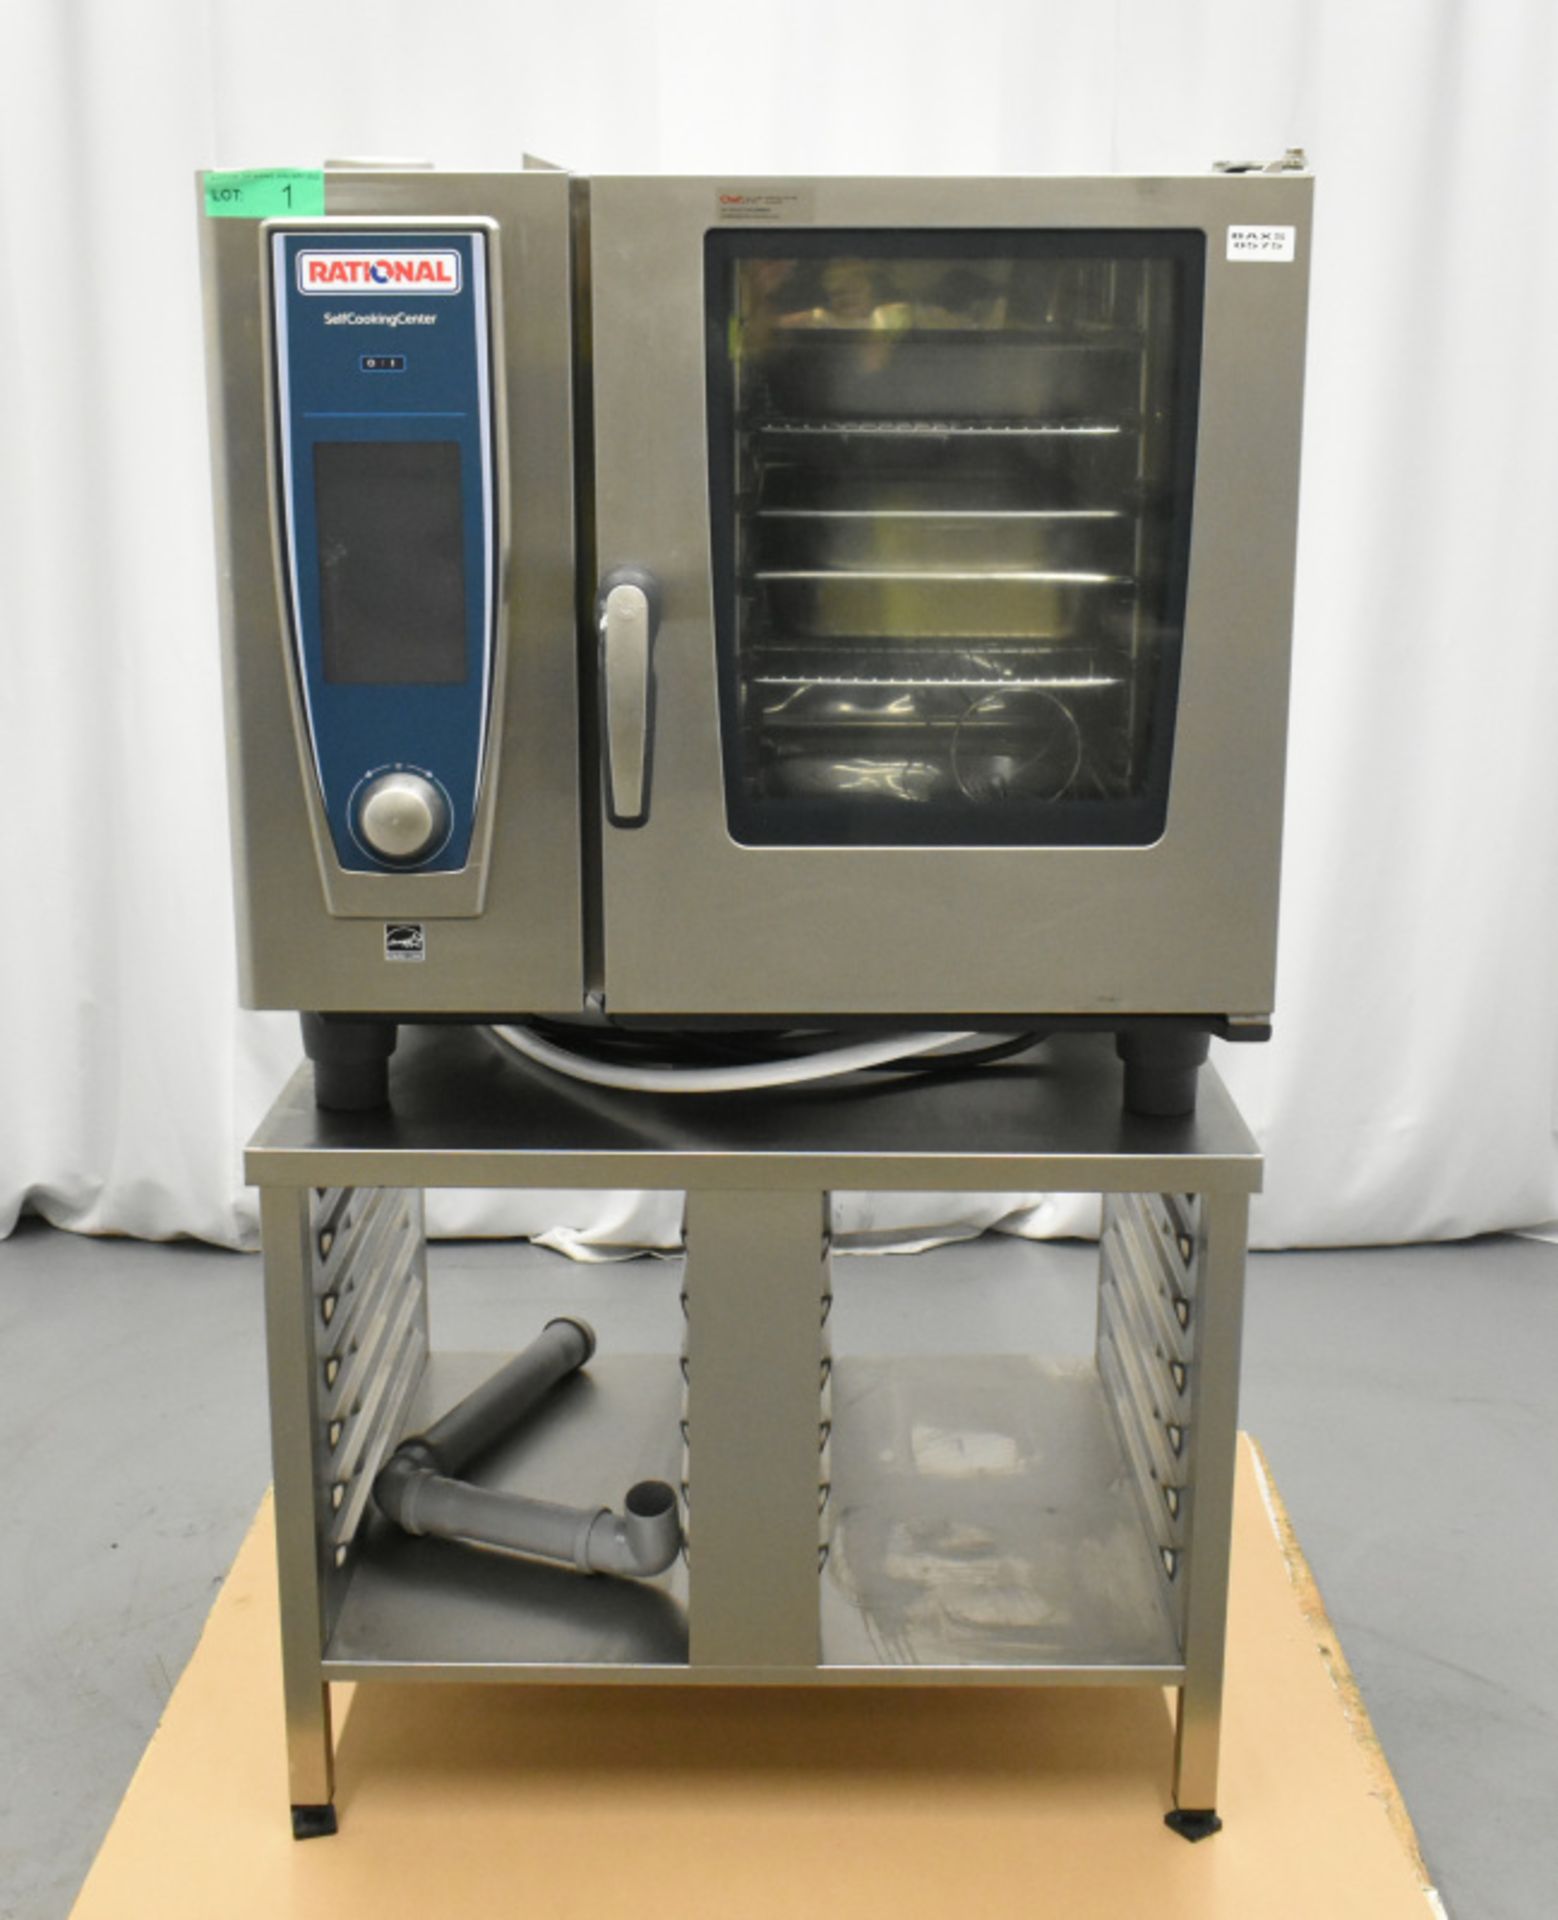 Rational Combi Oven on stand